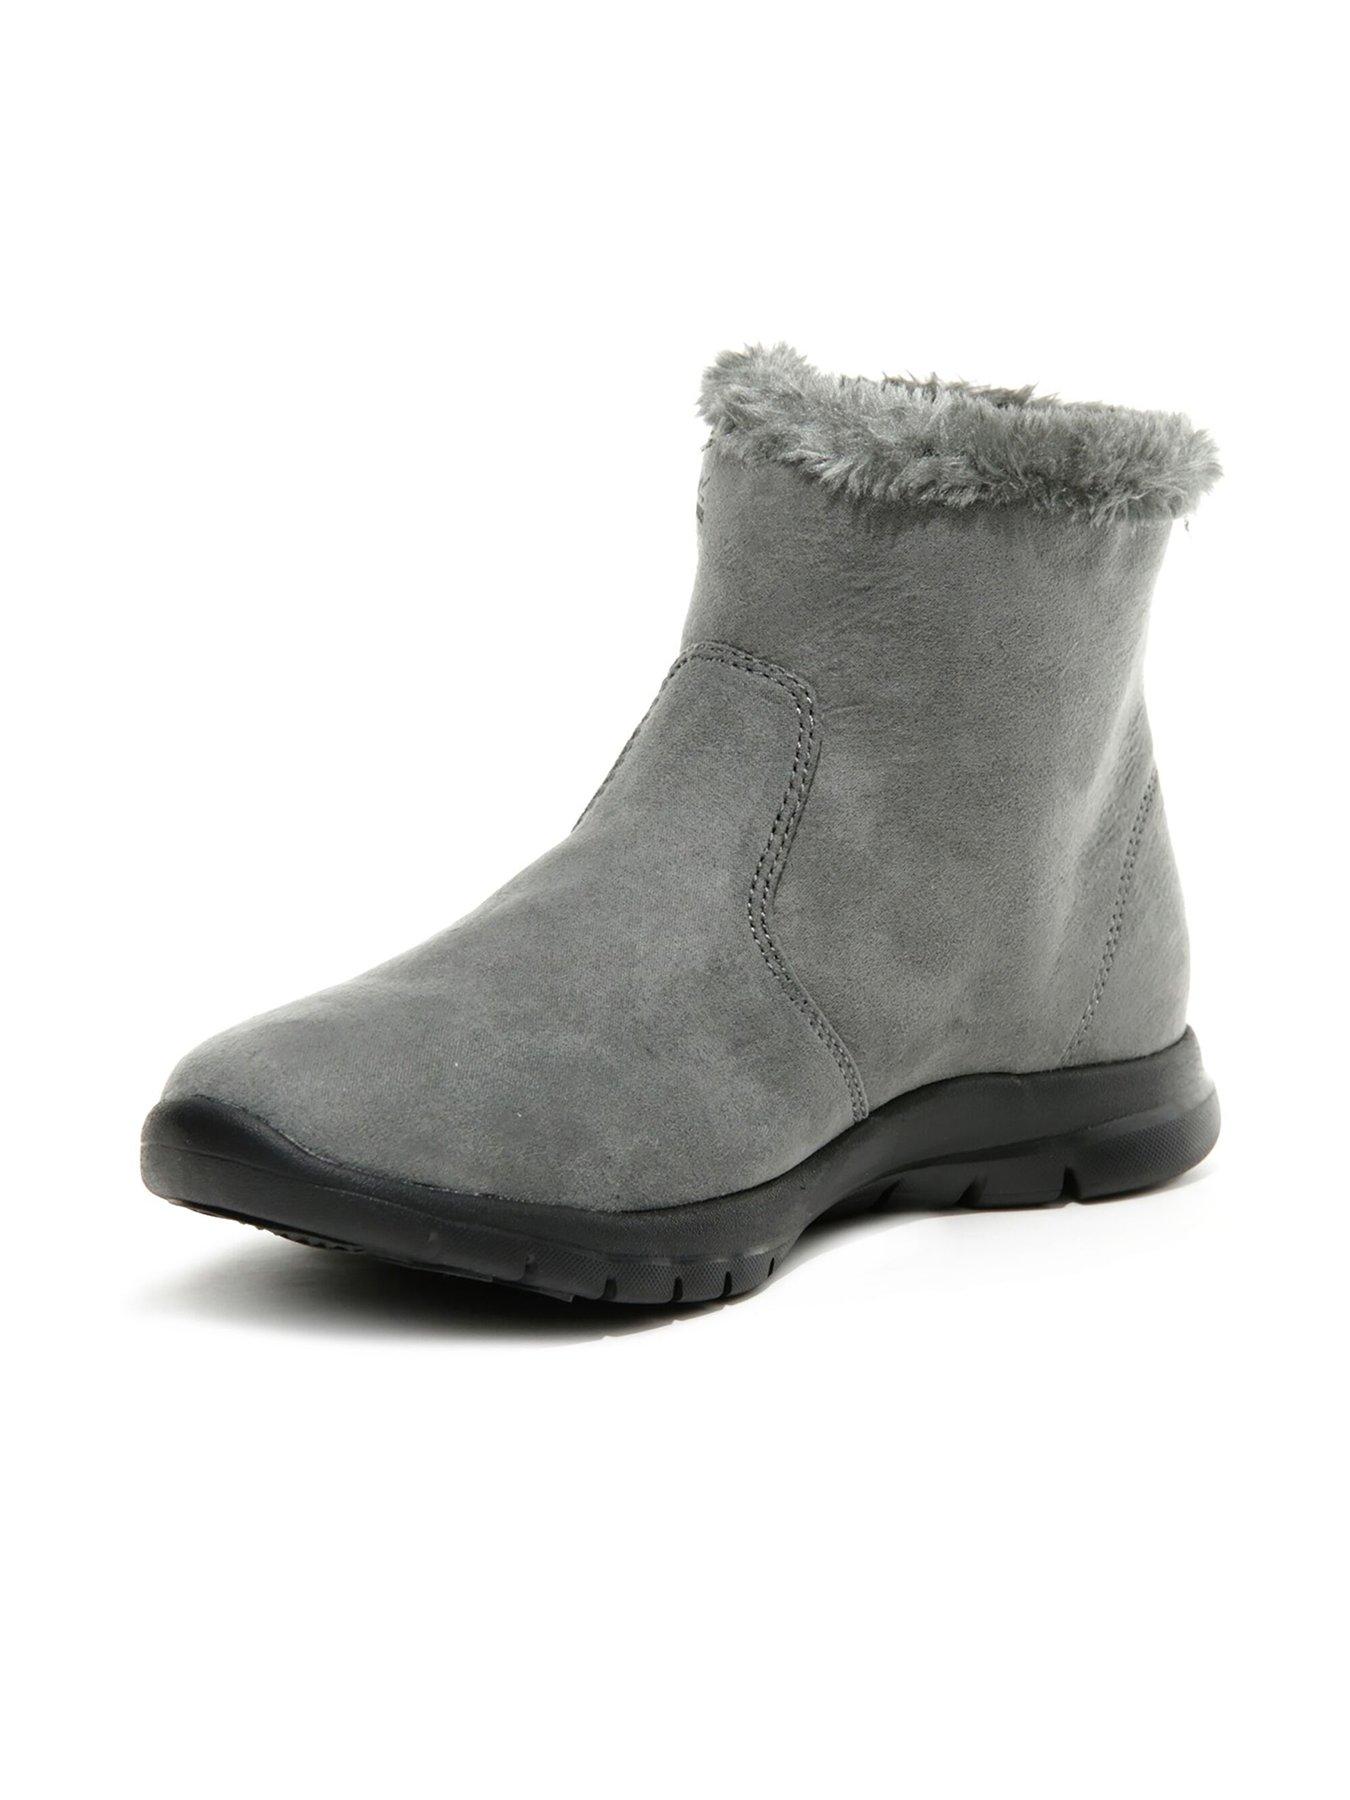 Shoes & boots Verena Boot